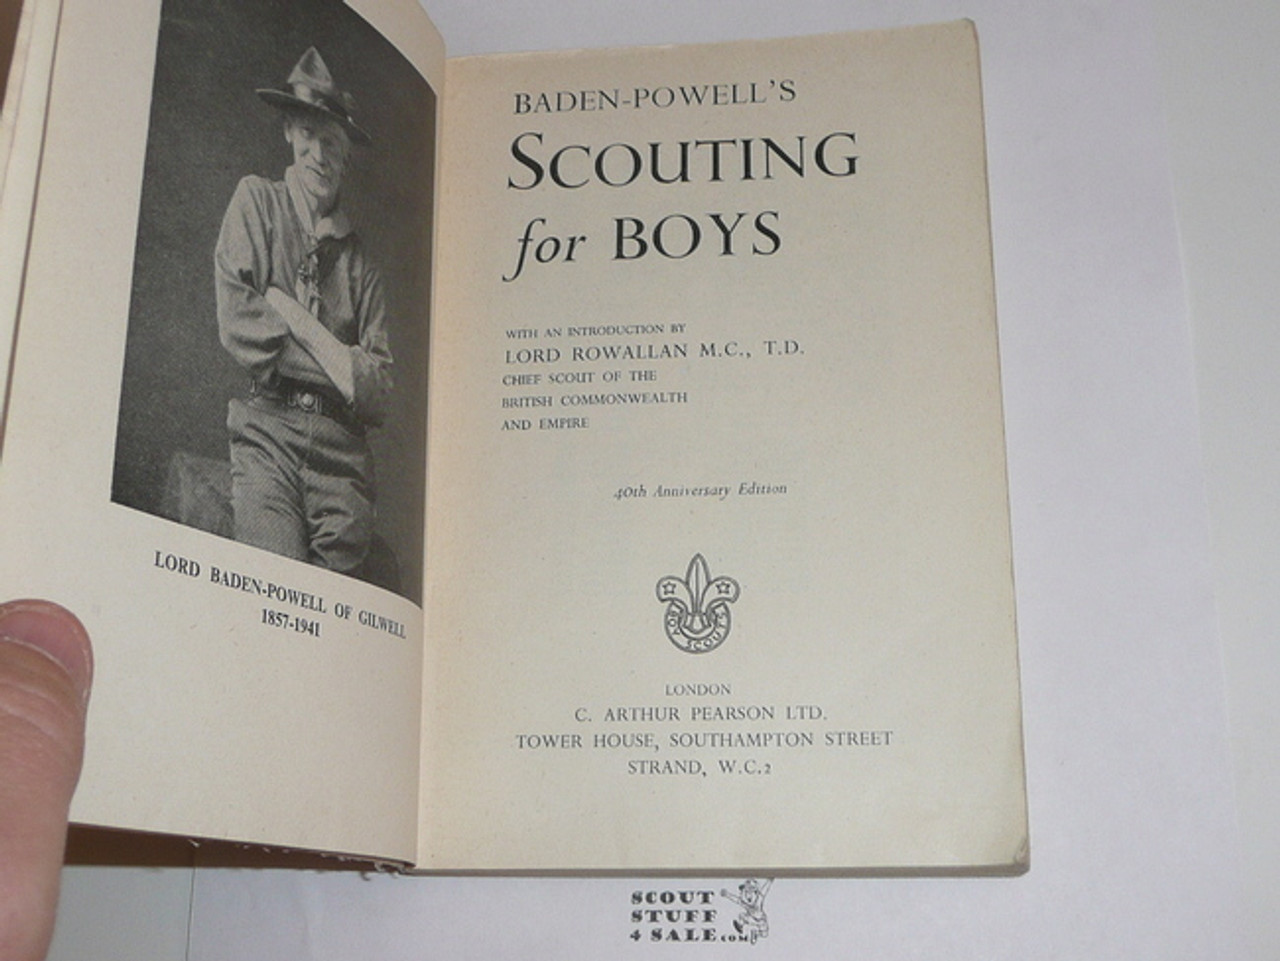 1948 Scouting for Boys, By Lord Baden-Powell, 40th Anniversary Edition